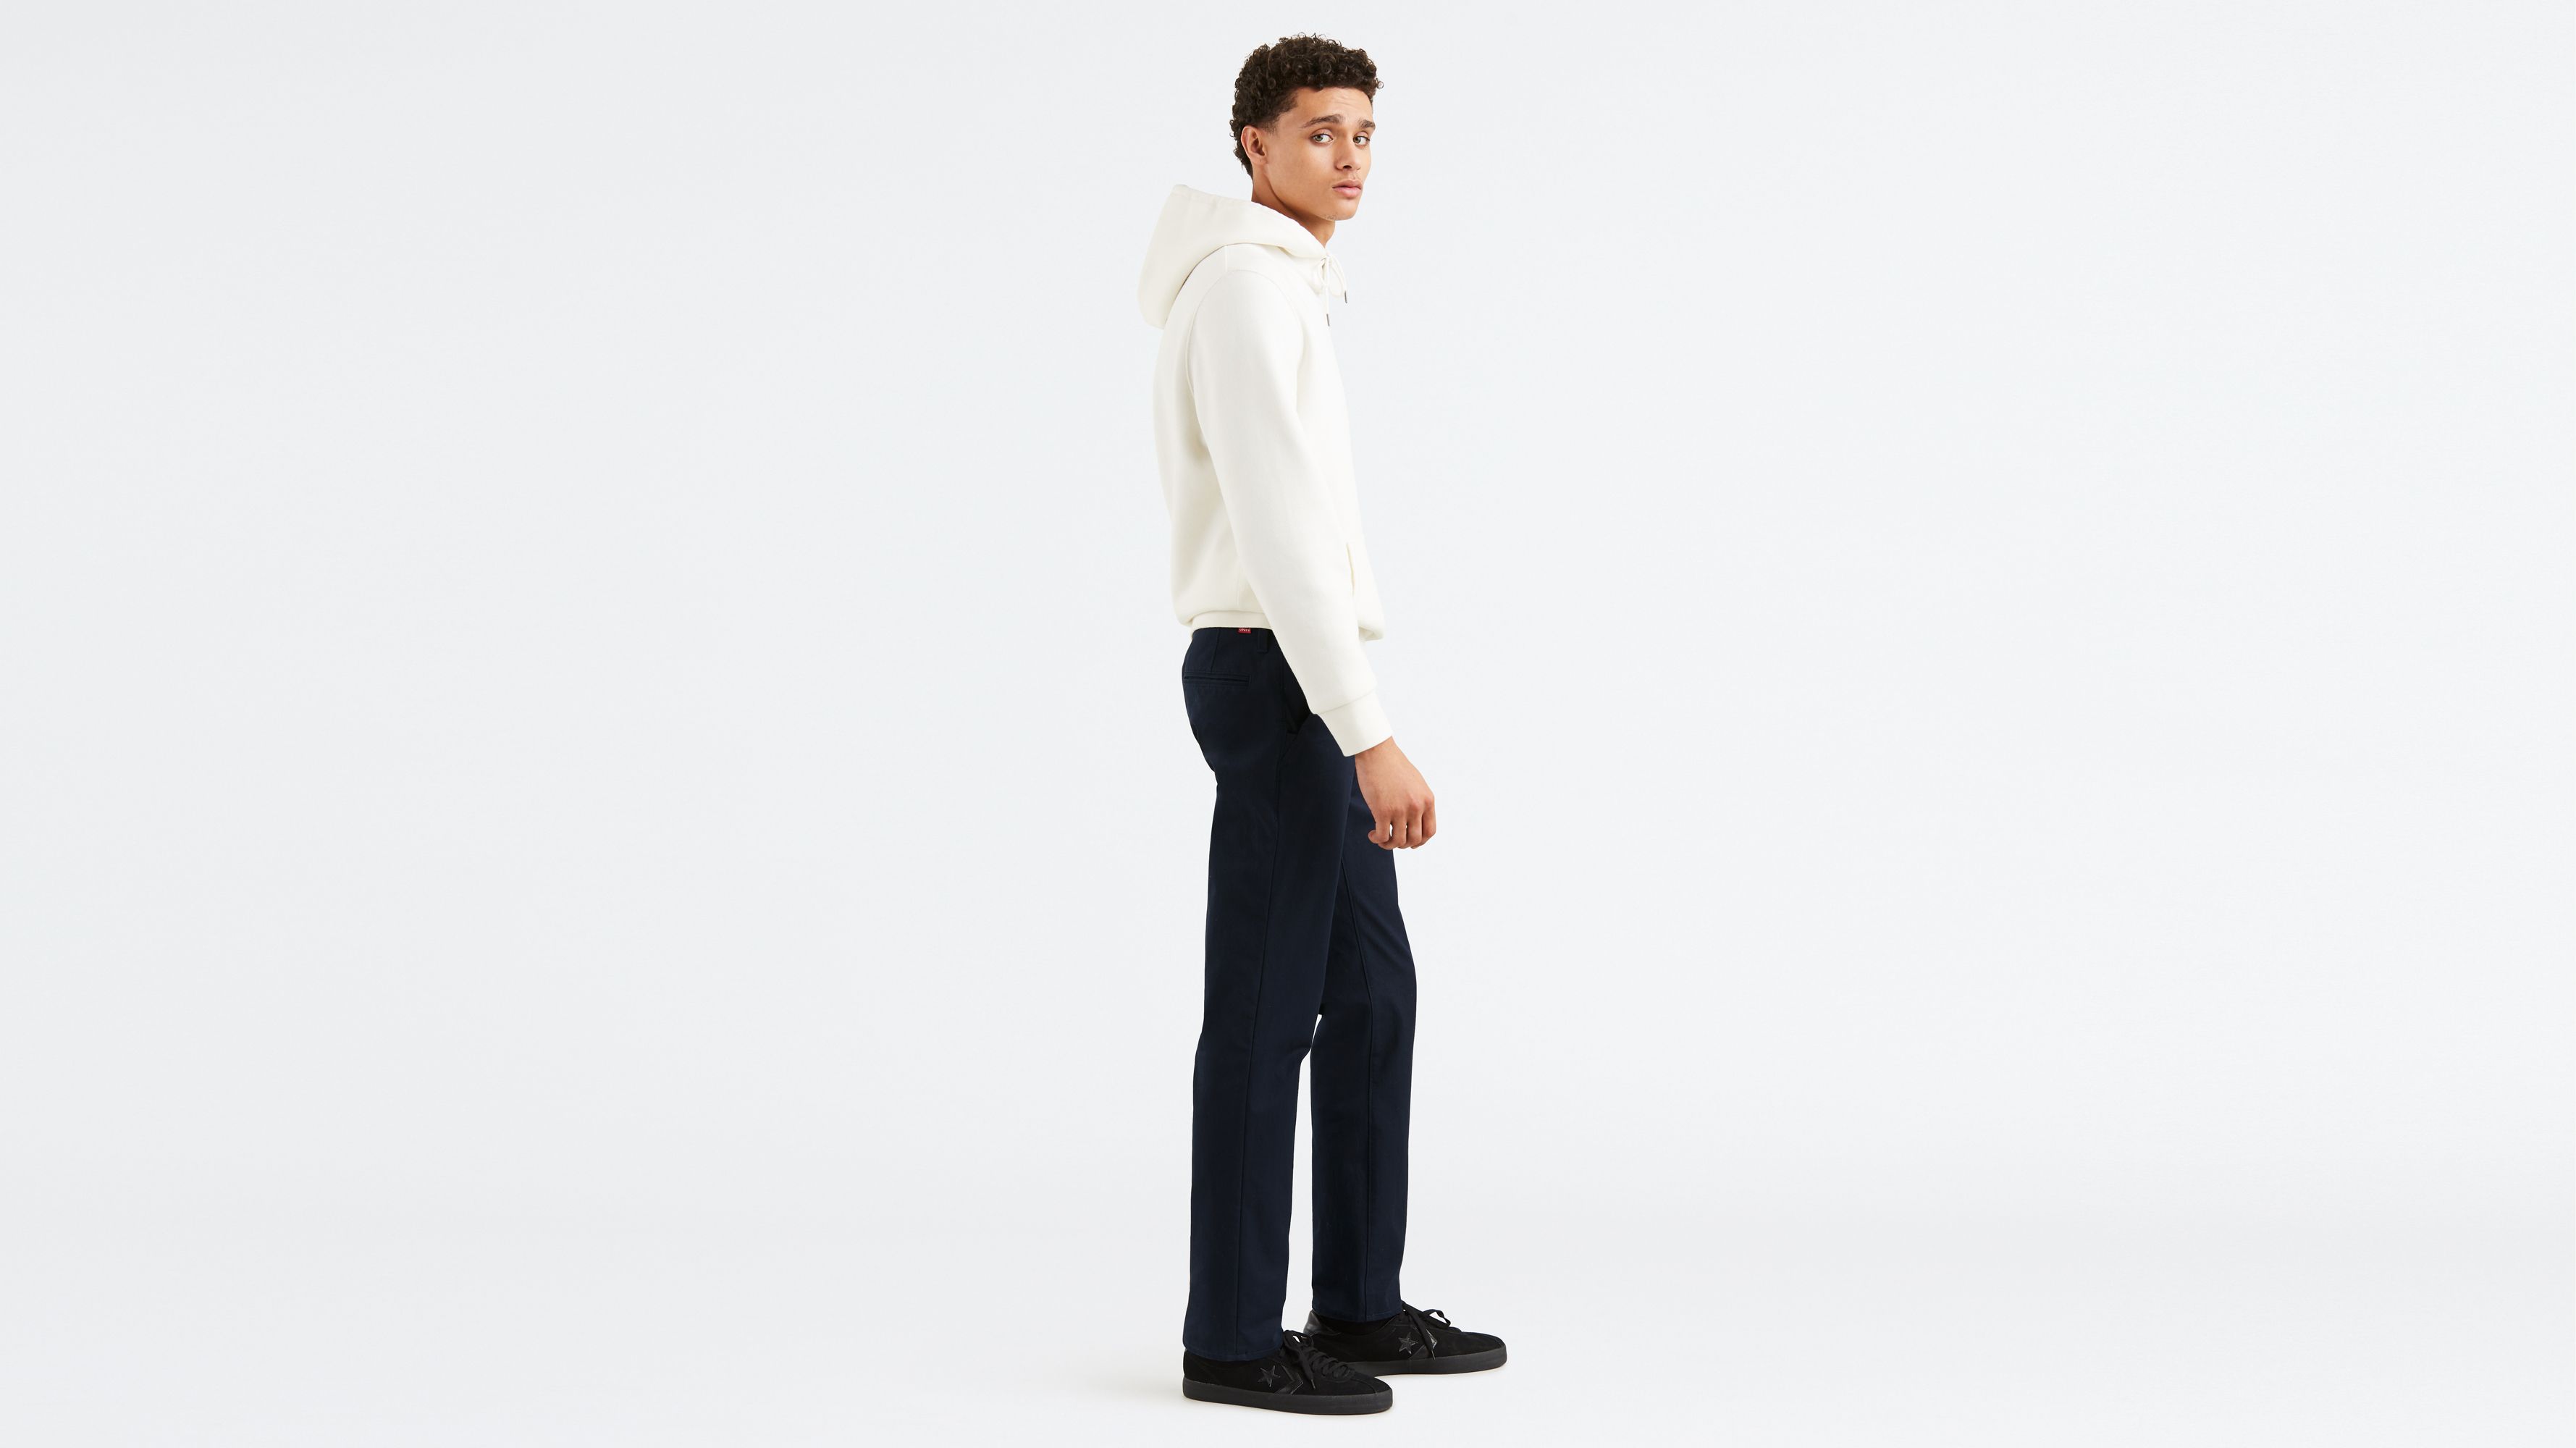 performance 511 trouser jeans